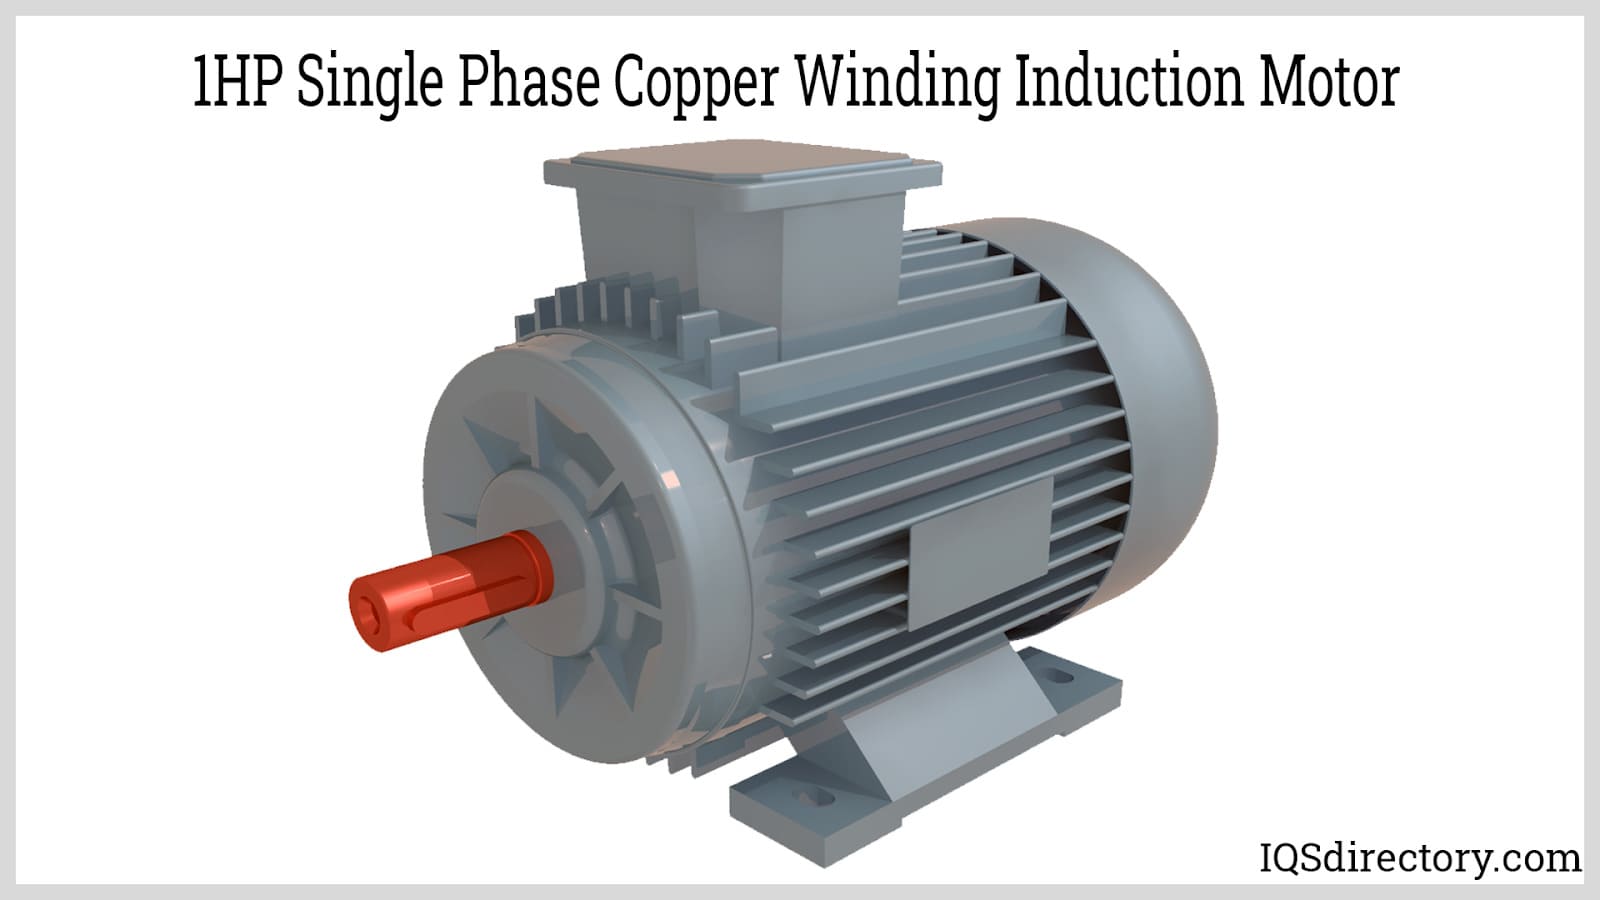 1HP Single Phase Copper Winding Induction Motor